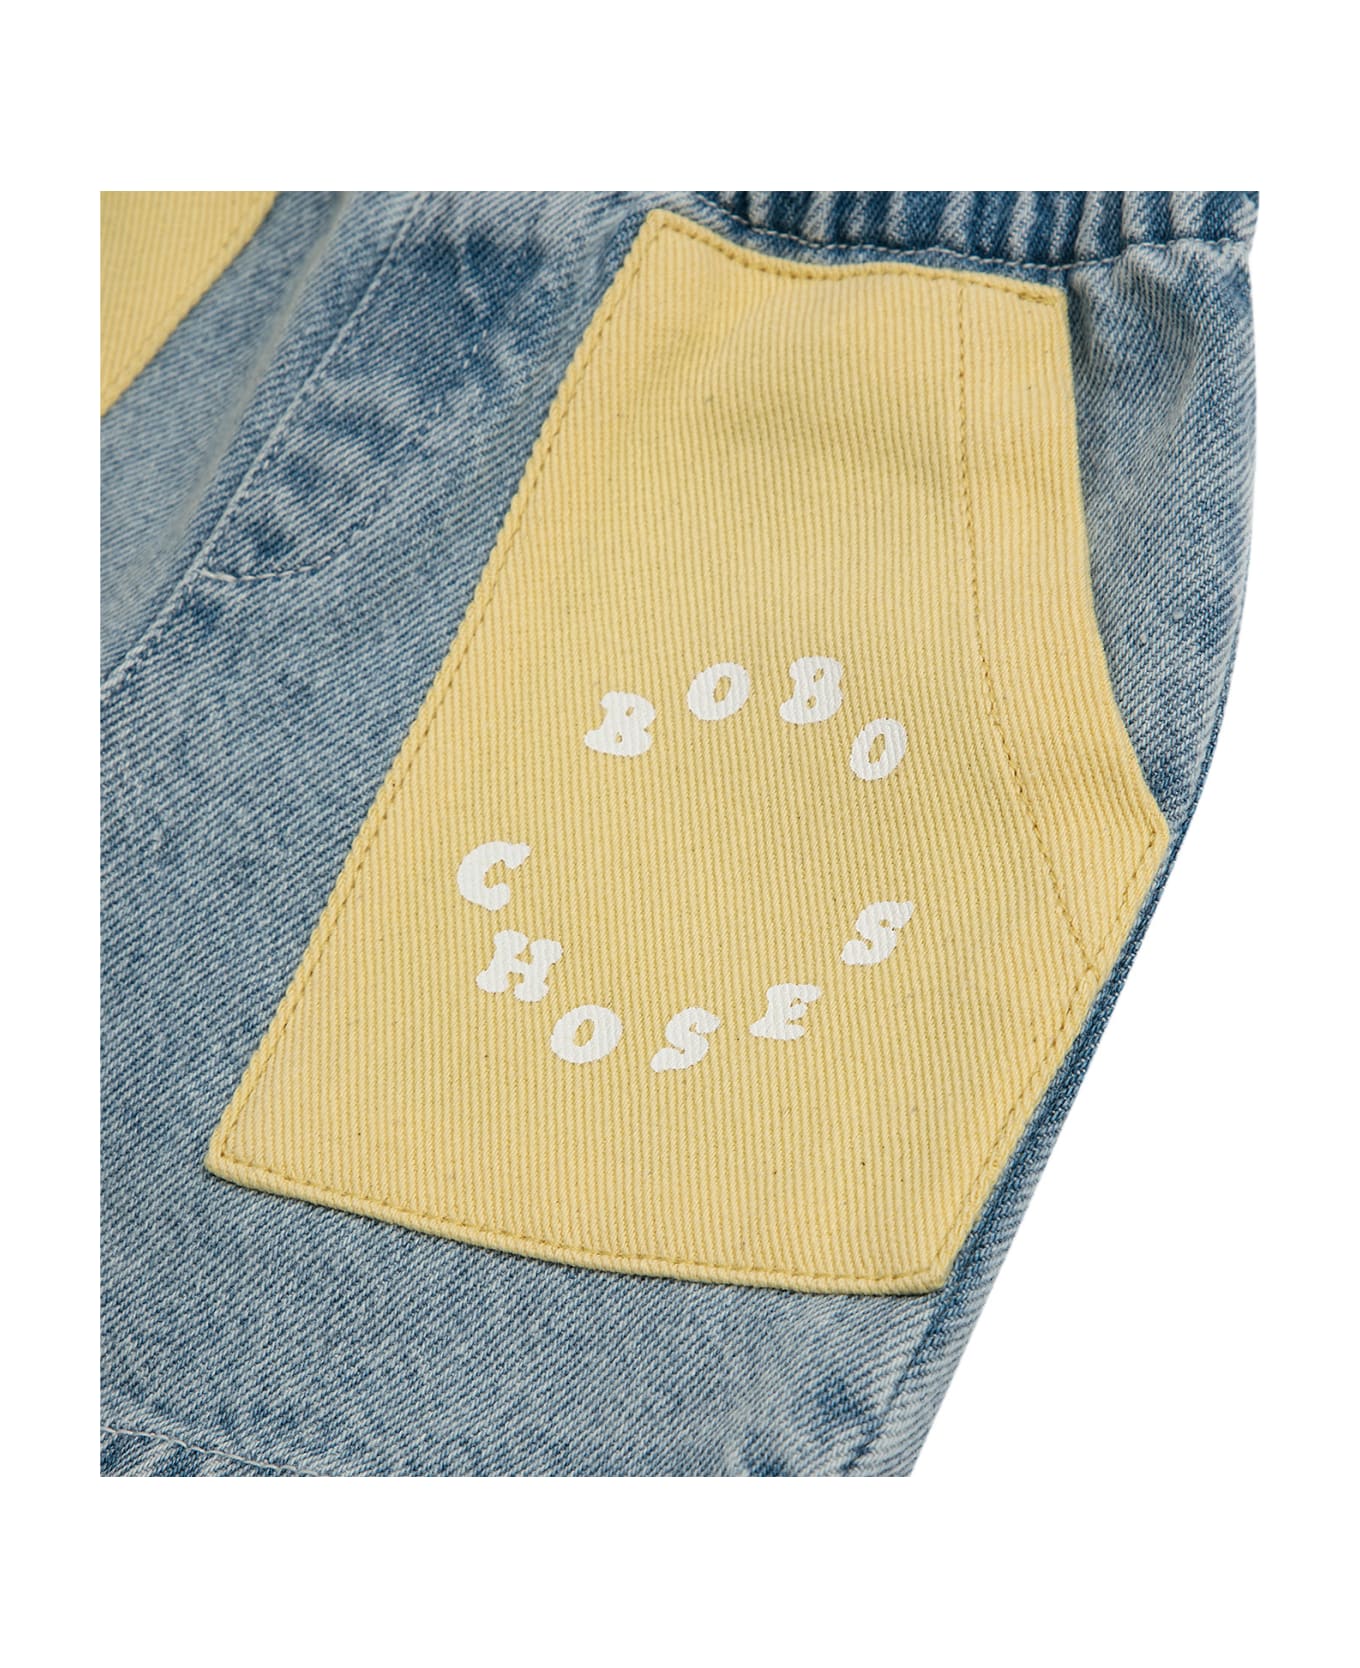 Bobo Choses Denim Shorts For Baby Boy With Yellow Pockets And Logo - Denim